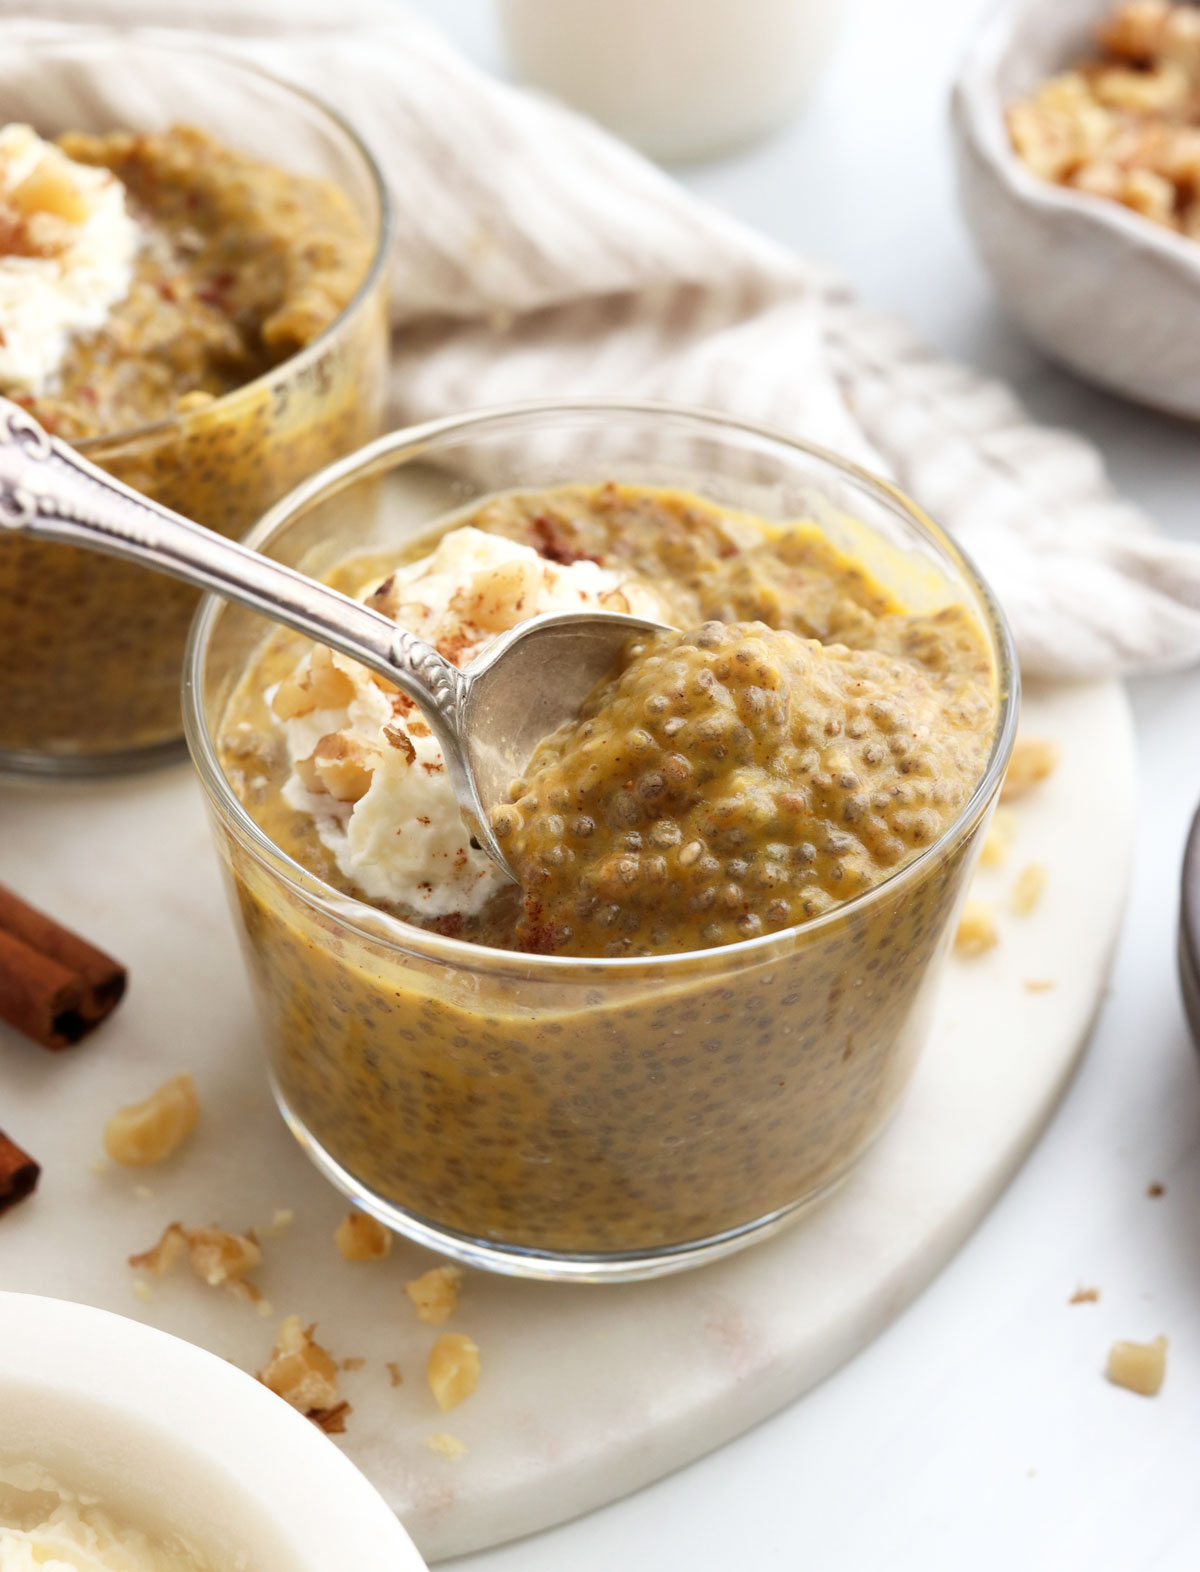 spoon scooping up some pumpkin chia pudding from a serving bowl